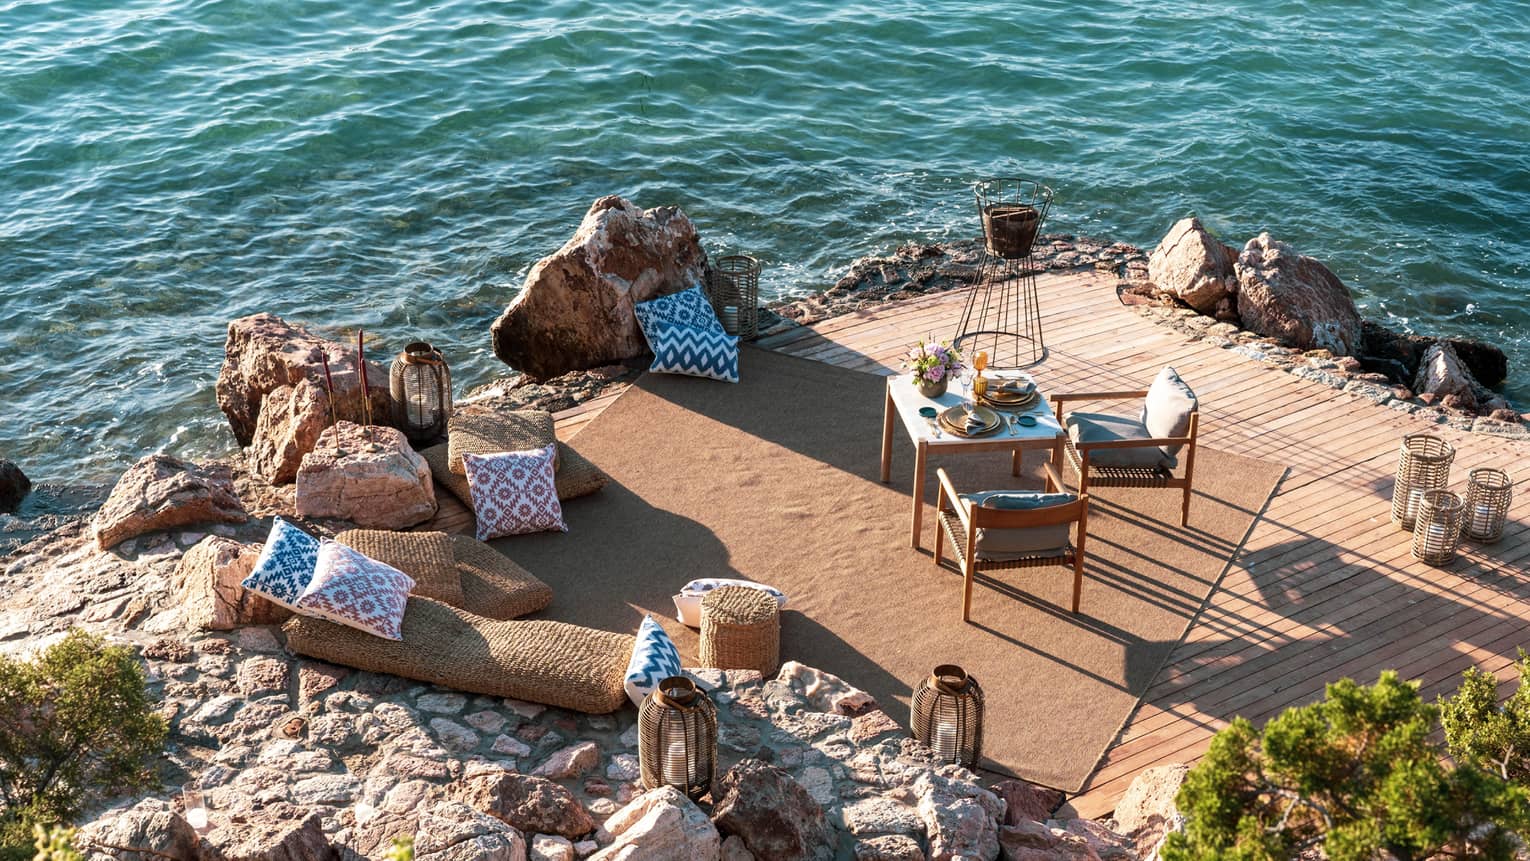 A dining table with two chairs is set on a private rocky peninsula next to the sea